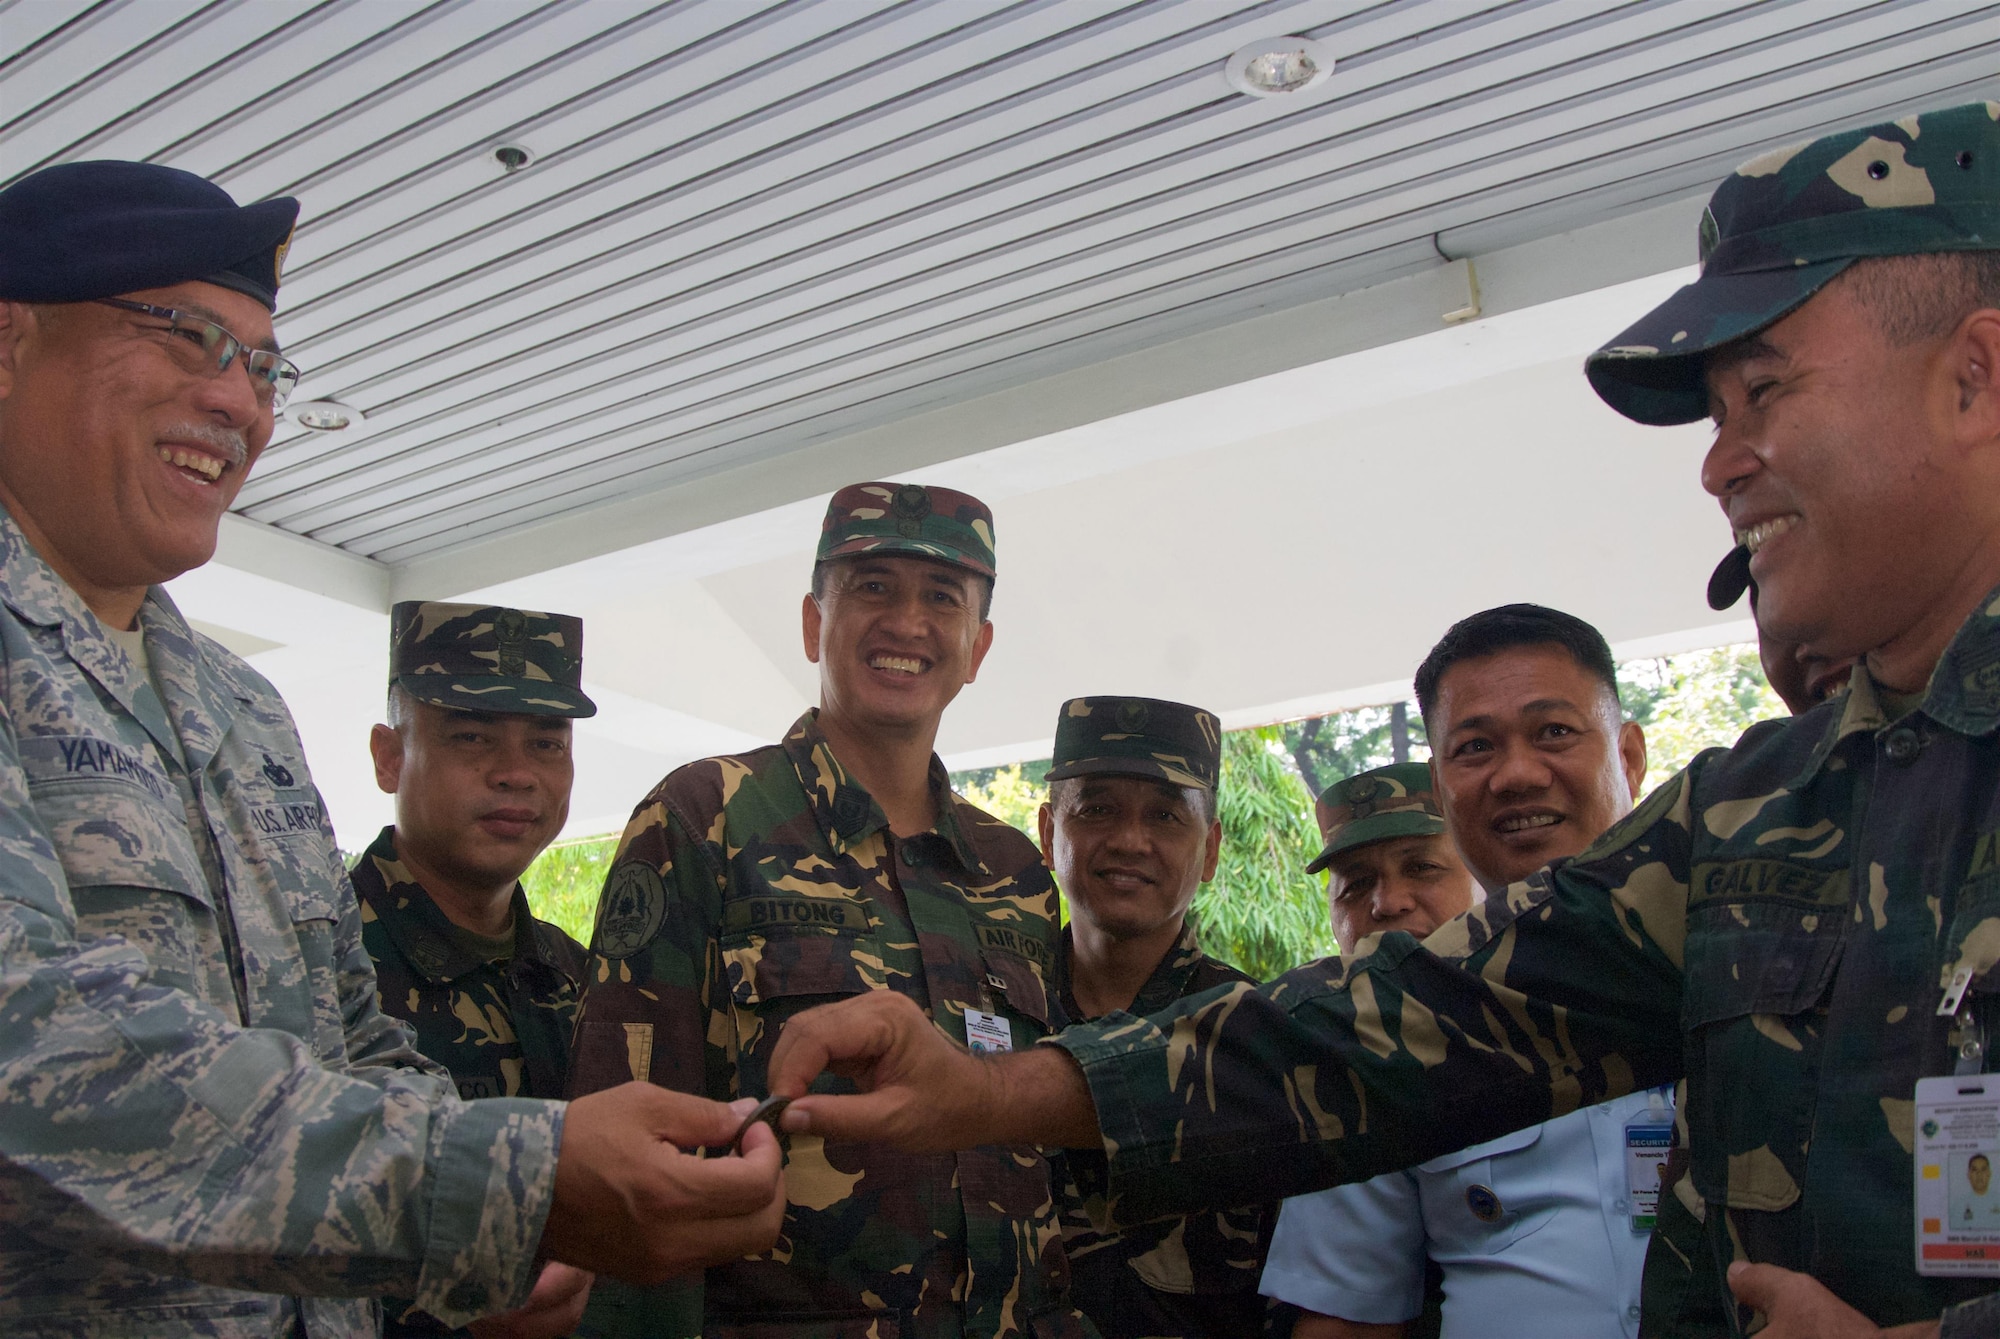 Chief Master Sgt. Melvin Yamamoto, superintendent, 154th Security Forces, coins Philippine Air Force Master Sgt. Manuel Galvez